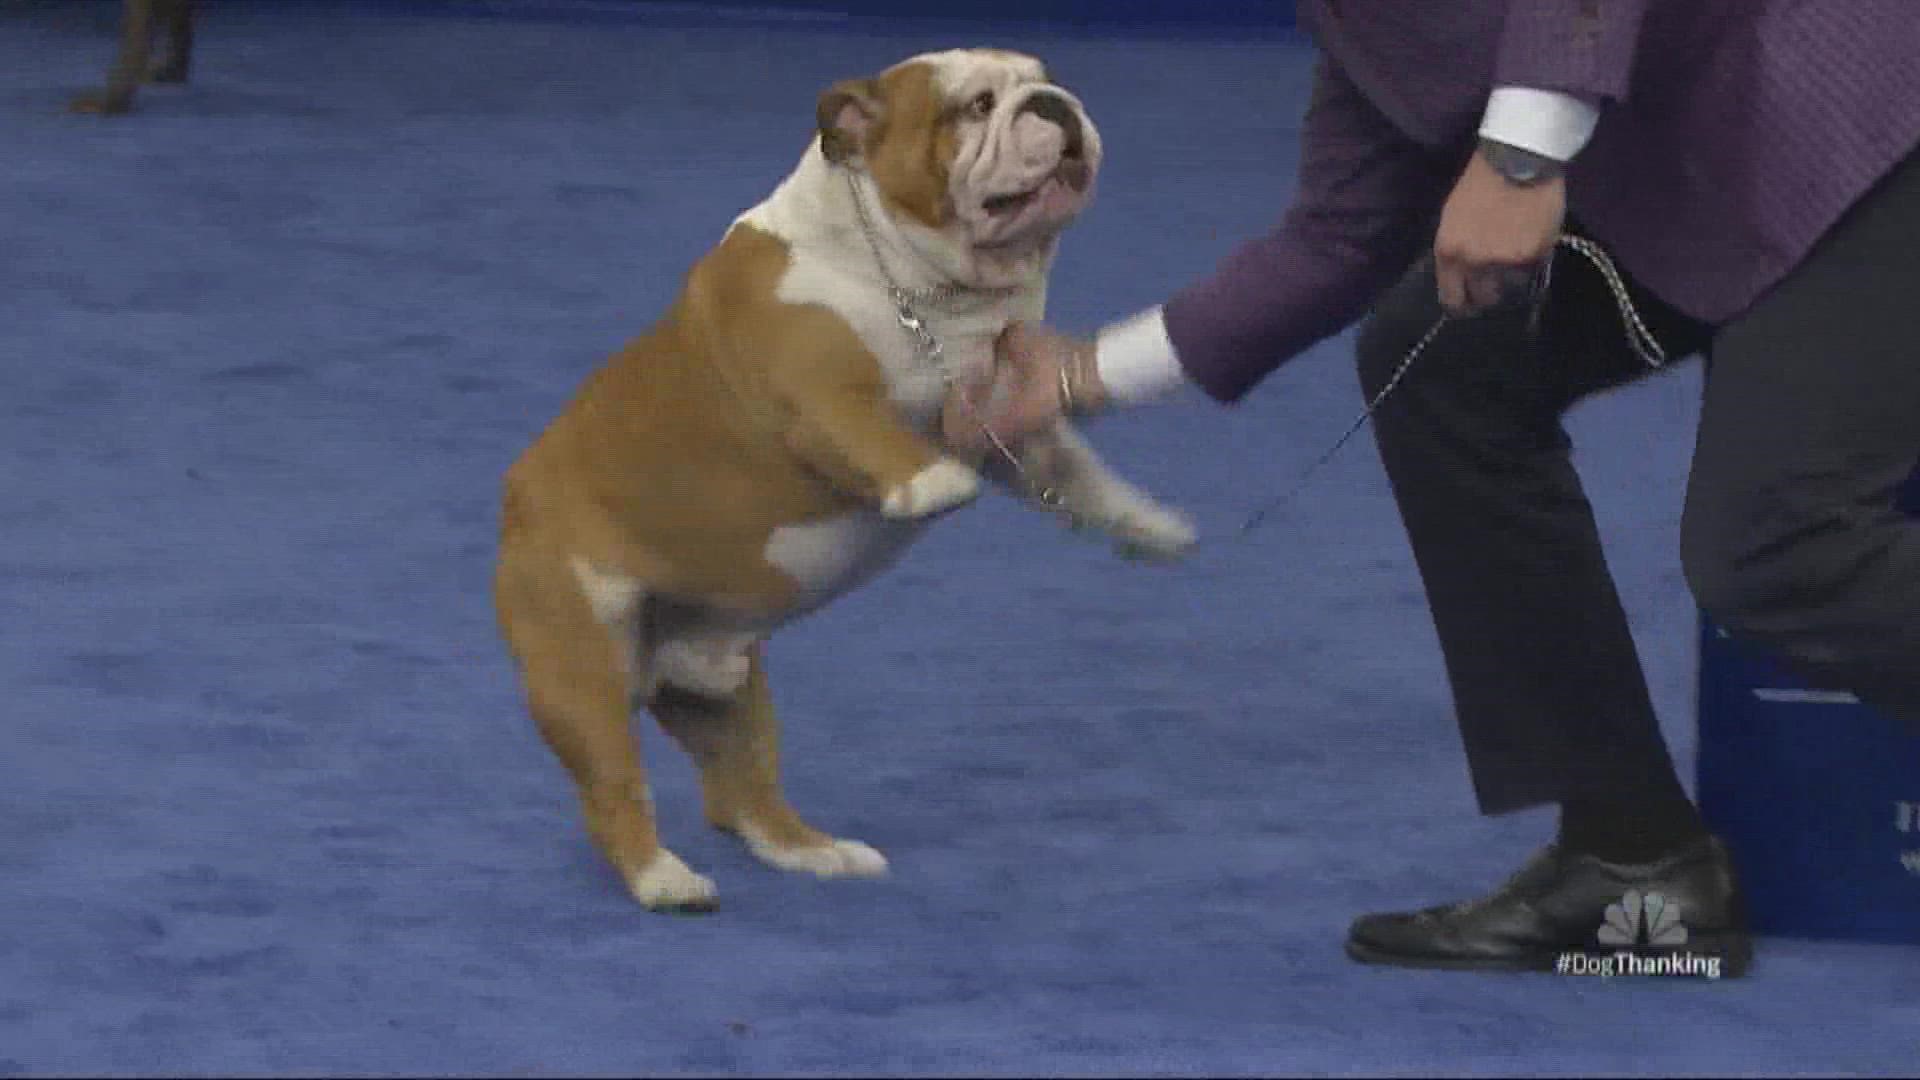 The 21st annual National Dog Show airs on NBC at 12 p.m. on Thanksgiving Day.